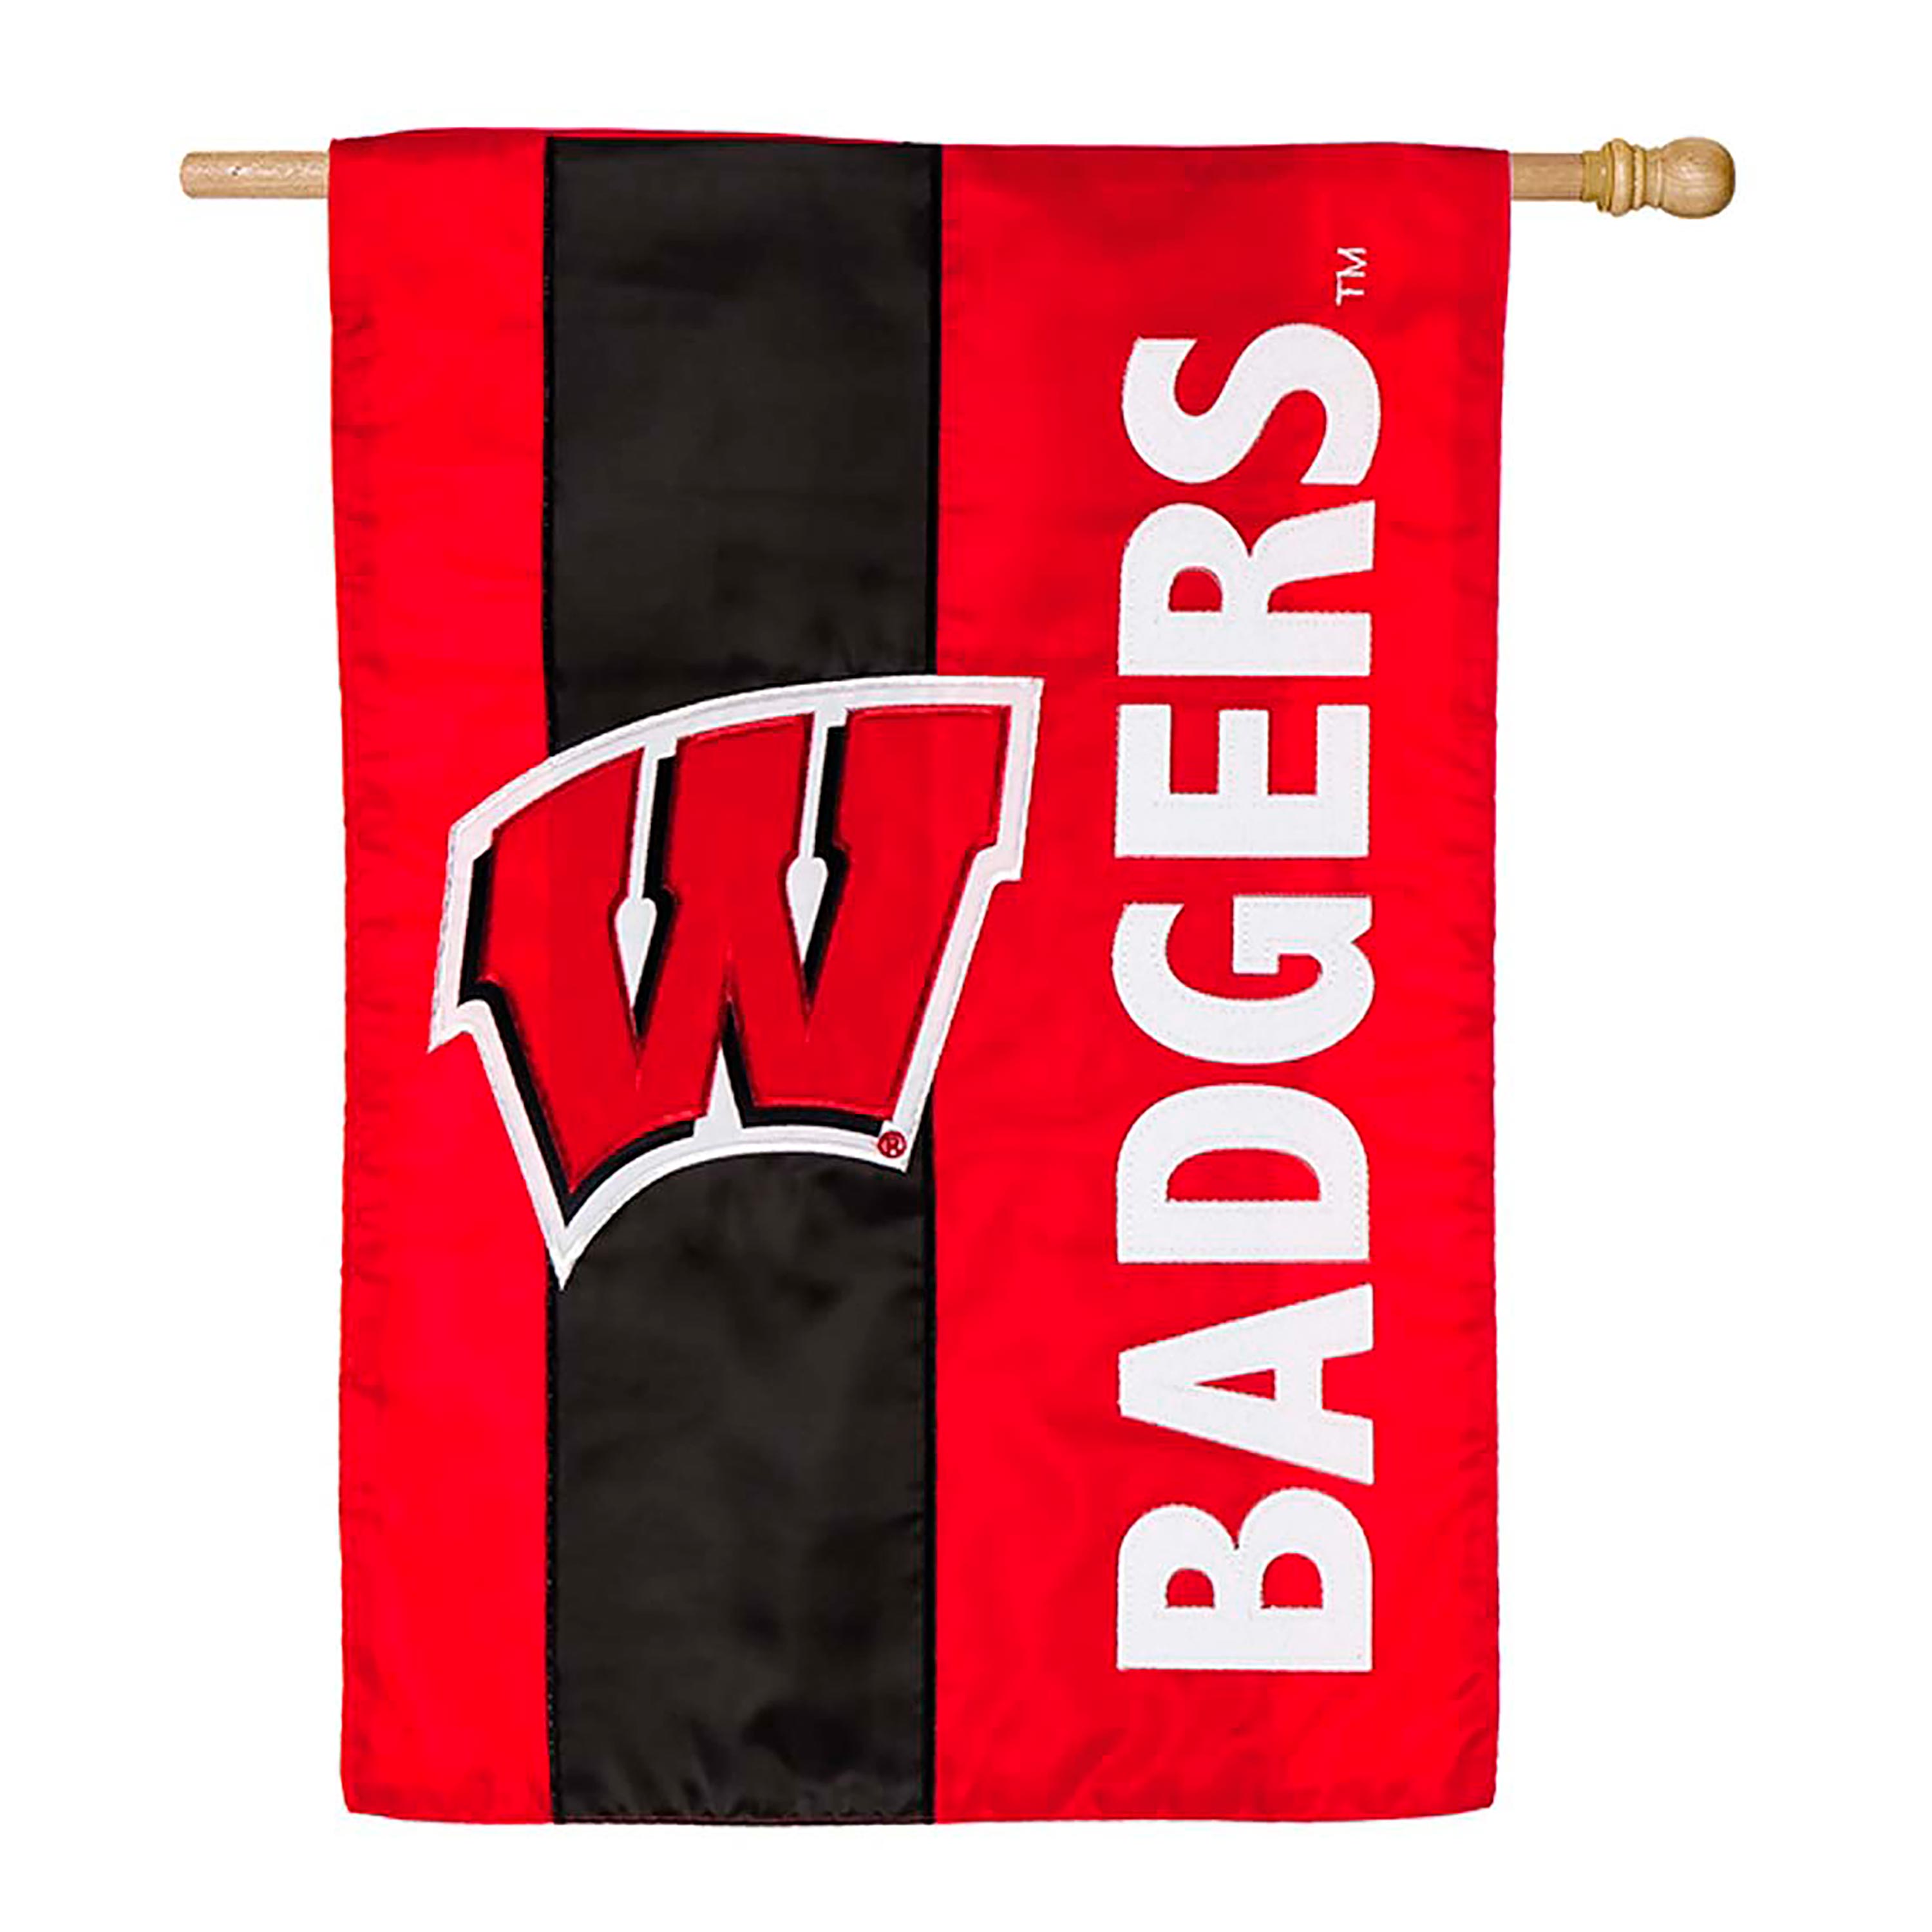 Double-Sided Embellished College Team Pride Applique House Flag - Univ of Wisconsin-Madison